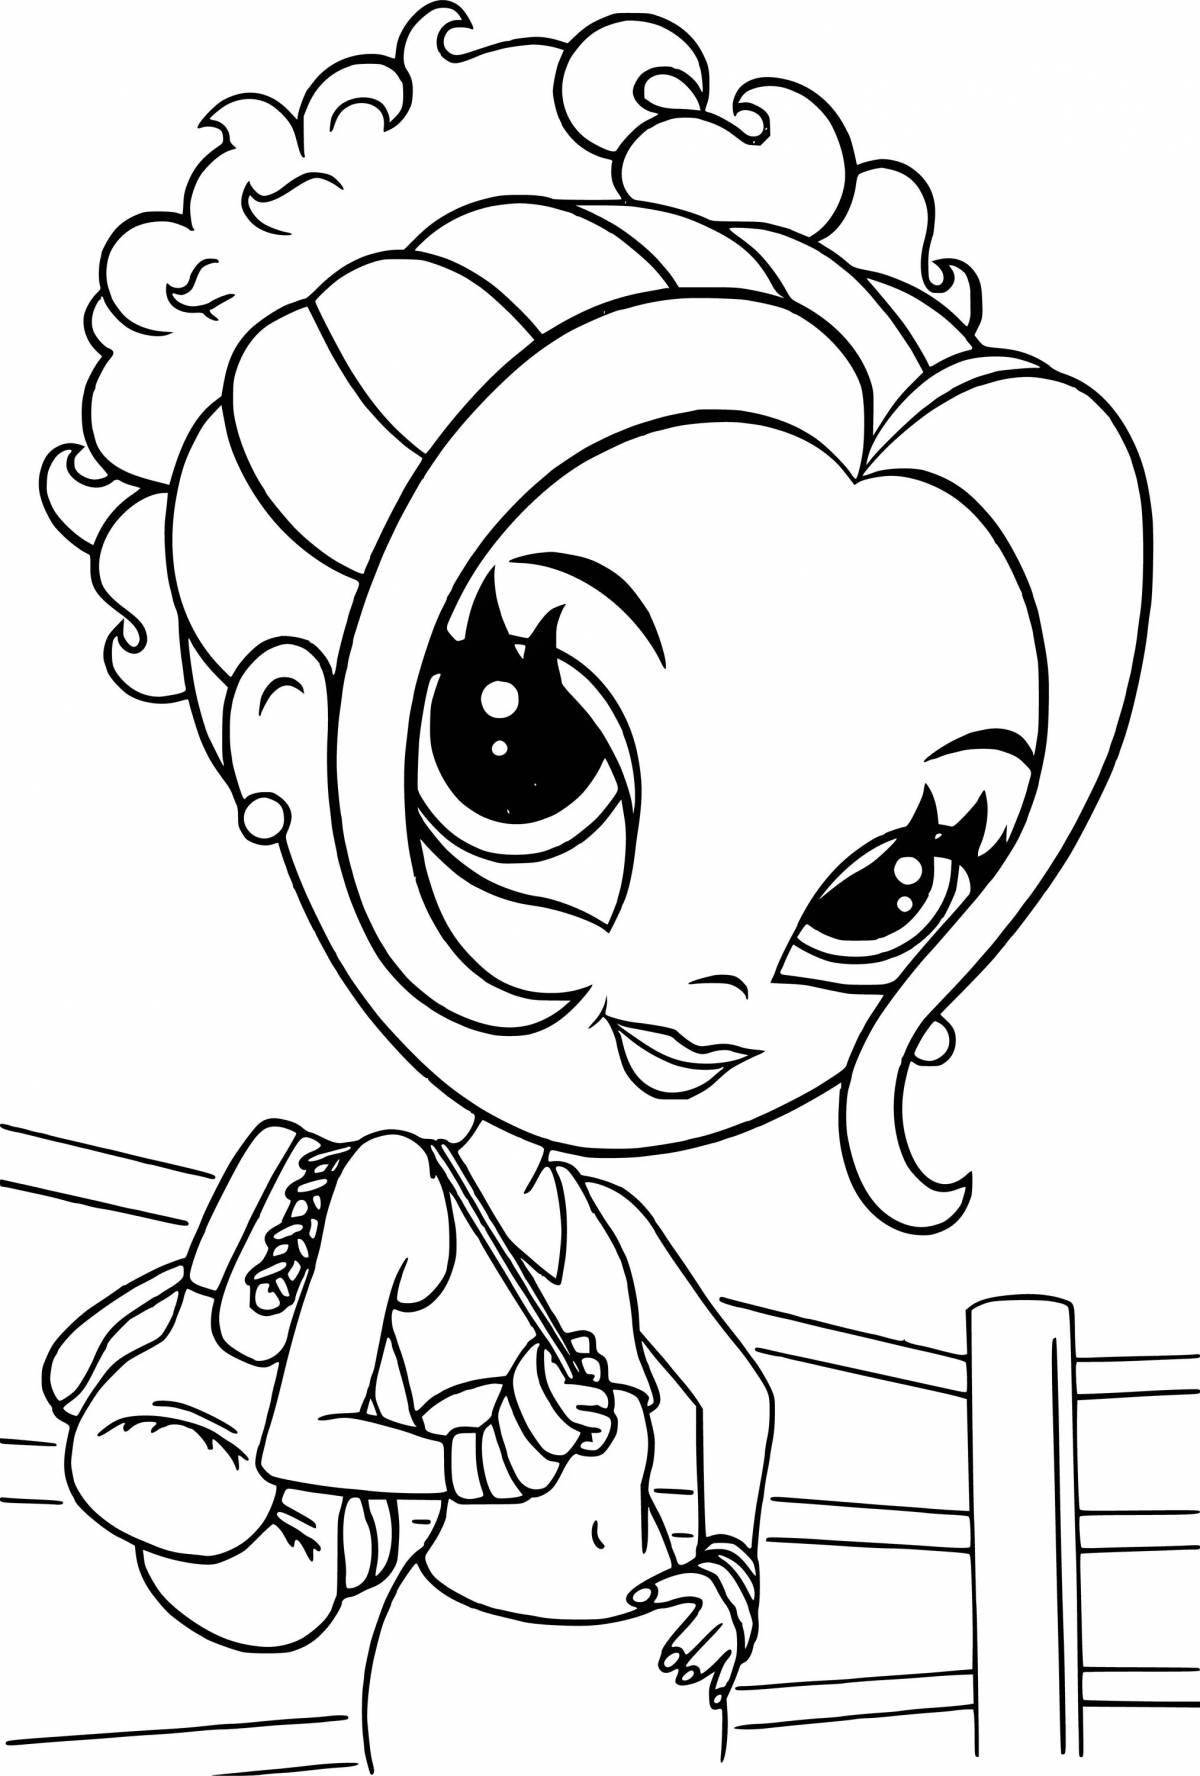 Adorable coloring book popular for girls